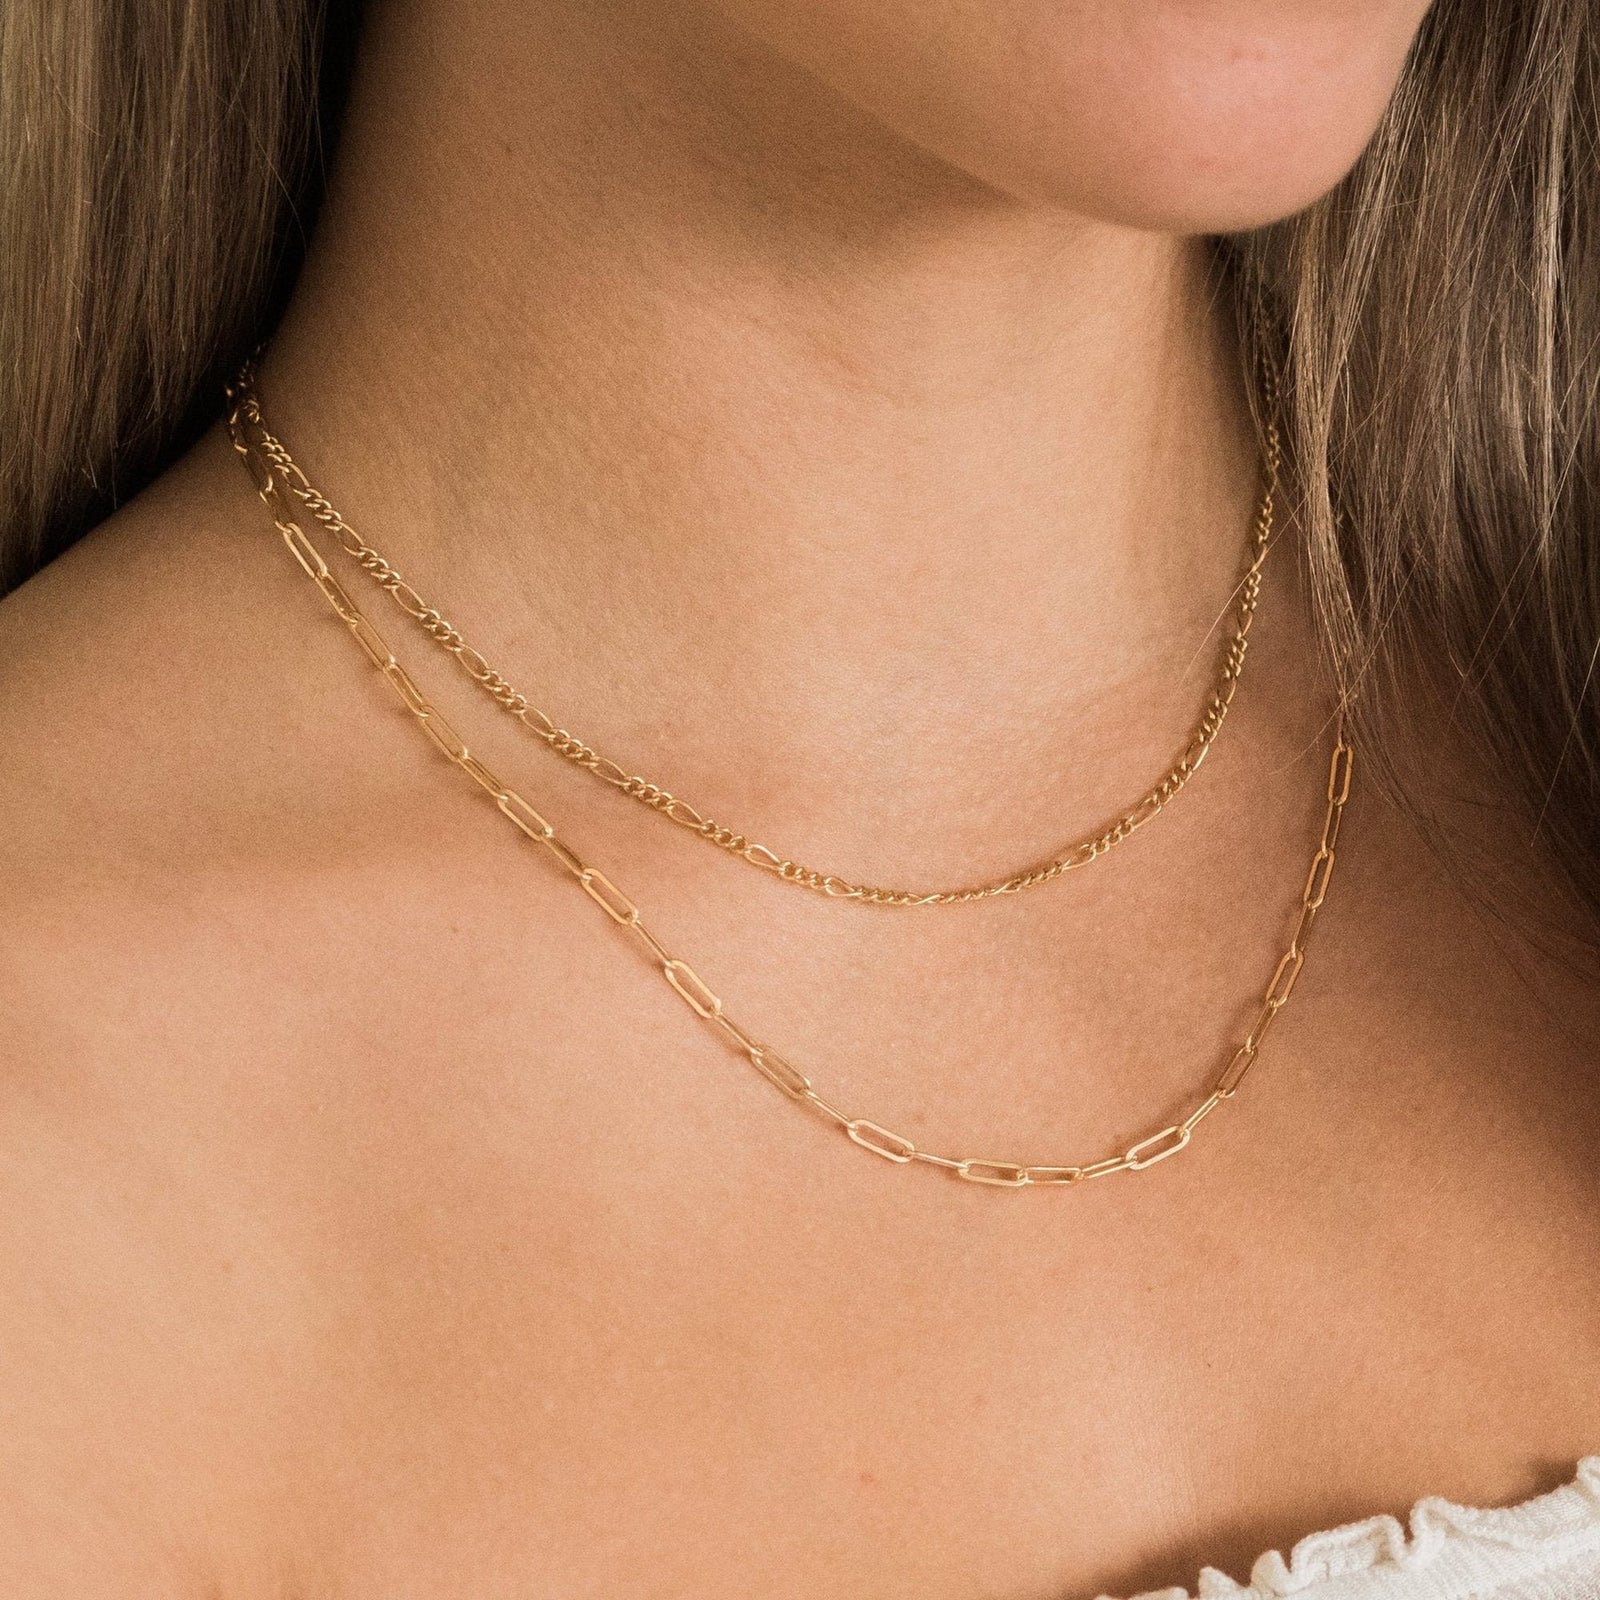 Necklaces #how #to #layer #necklaces Learn to love layering with